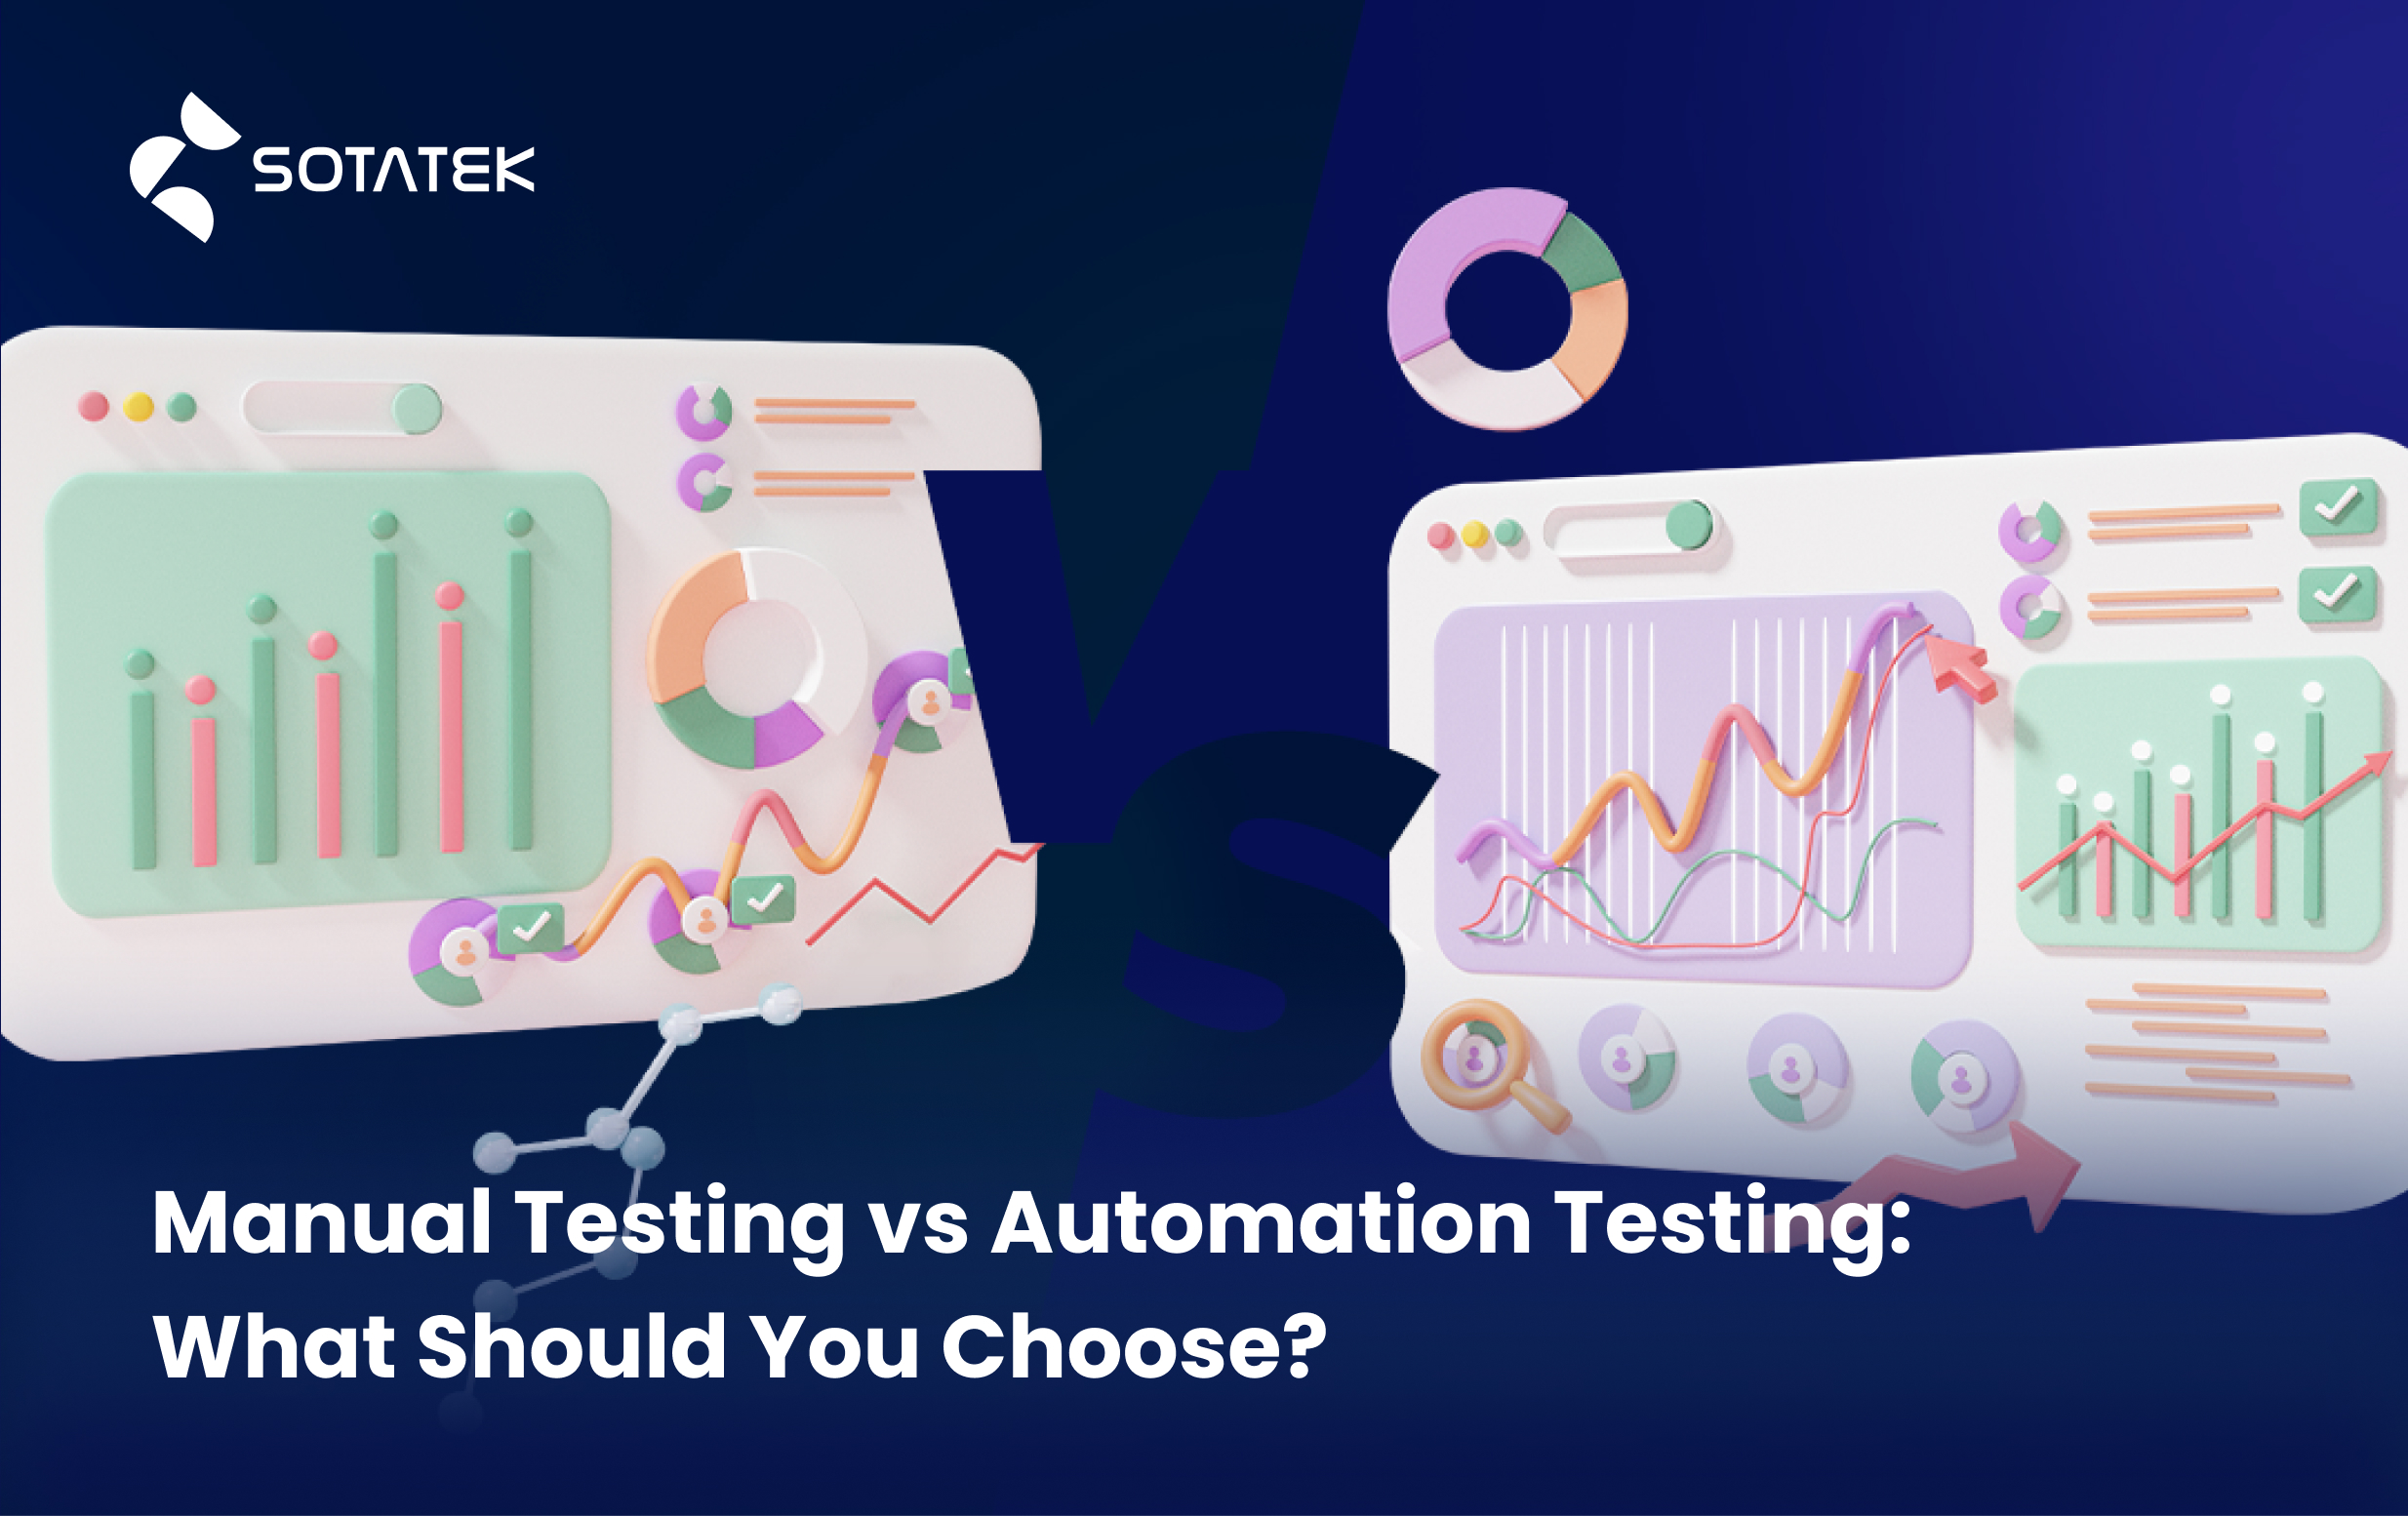 Manual Testing vs Automation Testing: What should you choose?